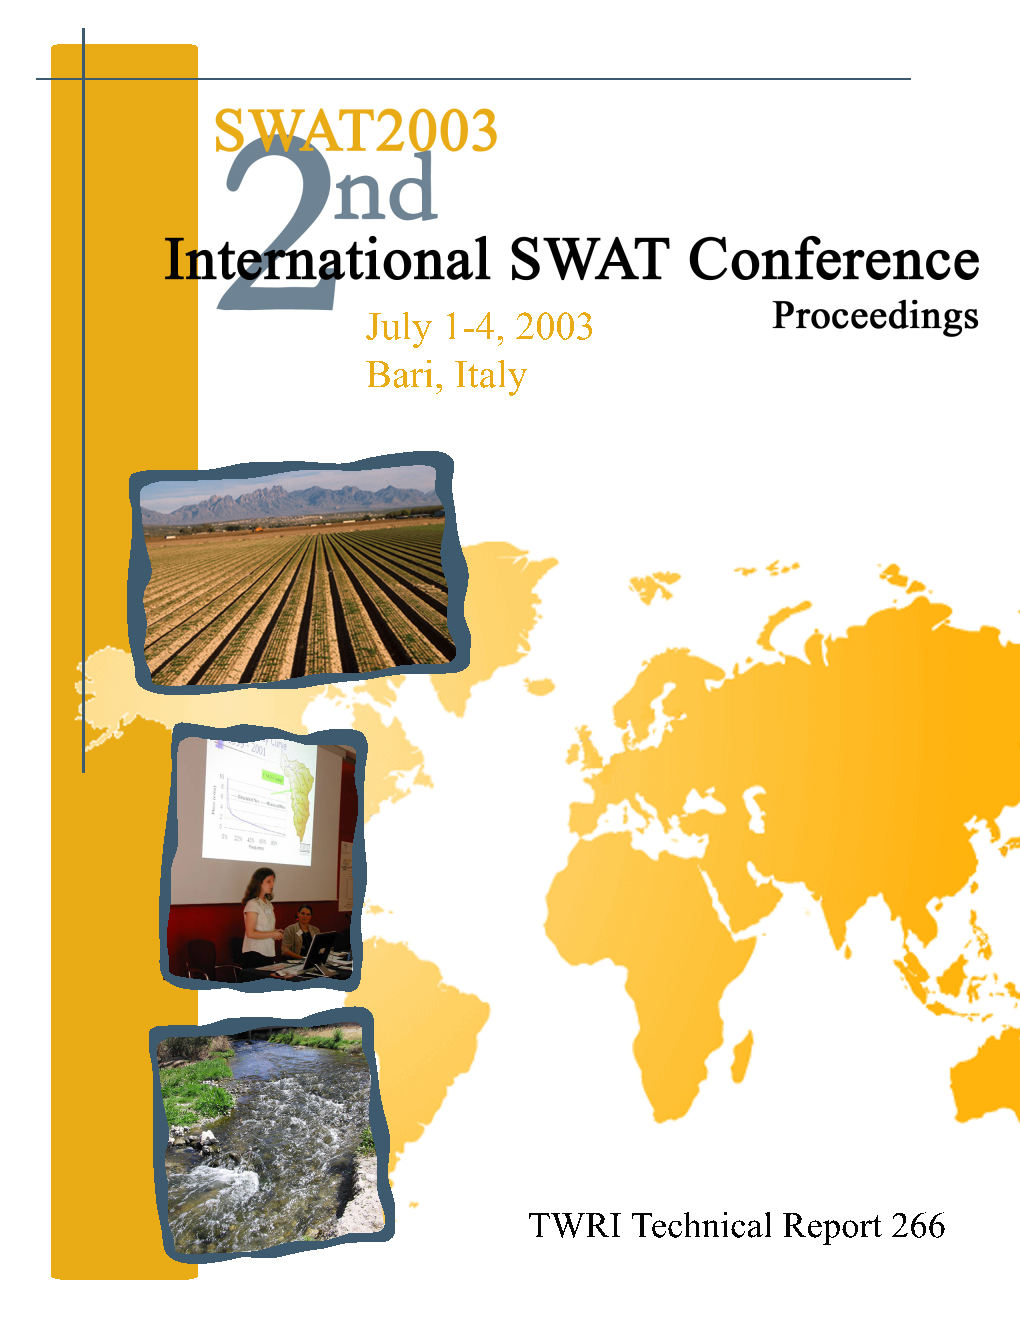 Download the 2Nd International SWAT Conference Proceedings